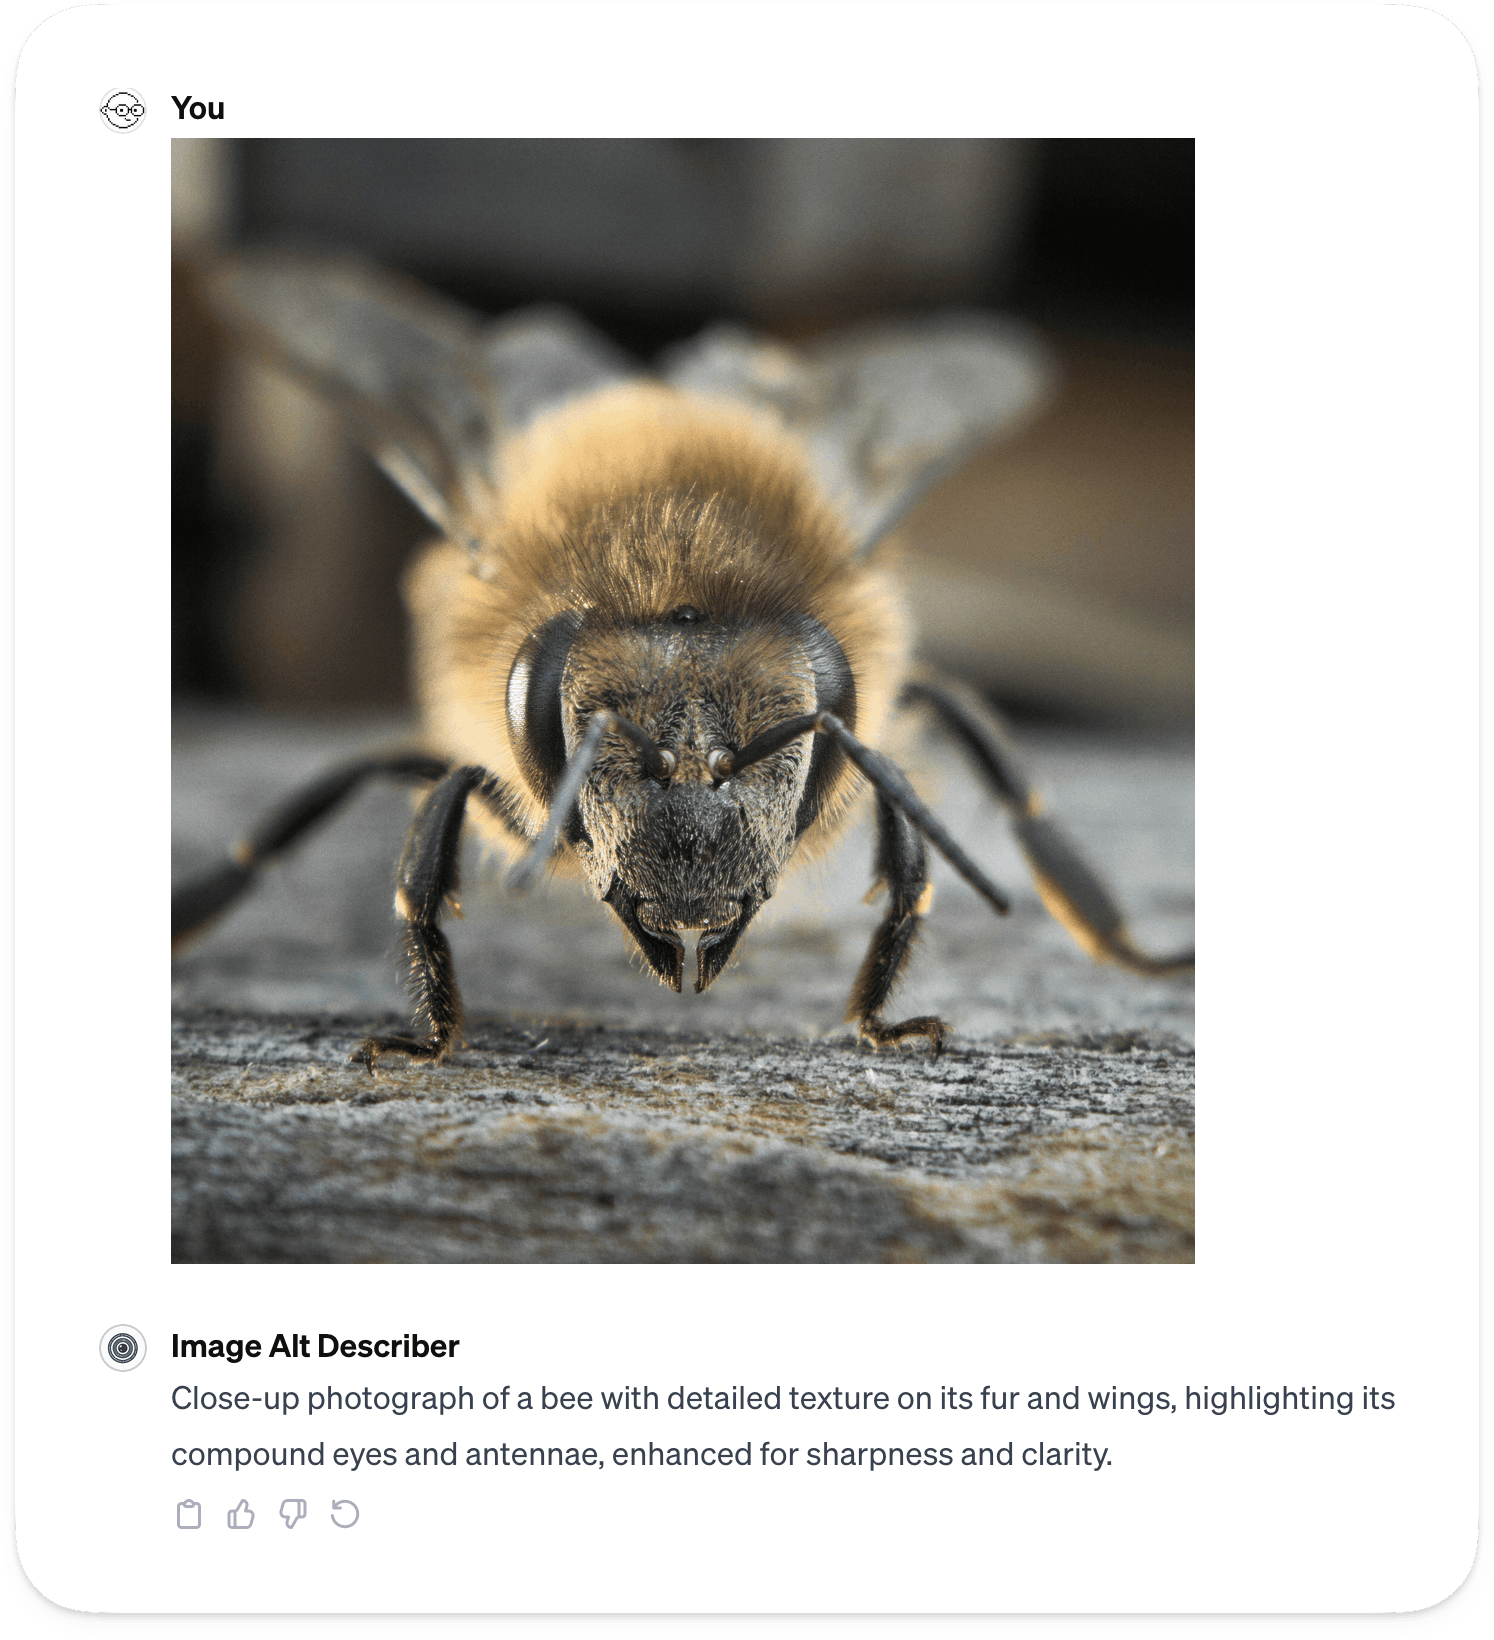 A screenshot of a ChatGPT dialog with a close-up photograph of a bee, with a caption by 'Image Alt Describer' detailing the image's visual content.